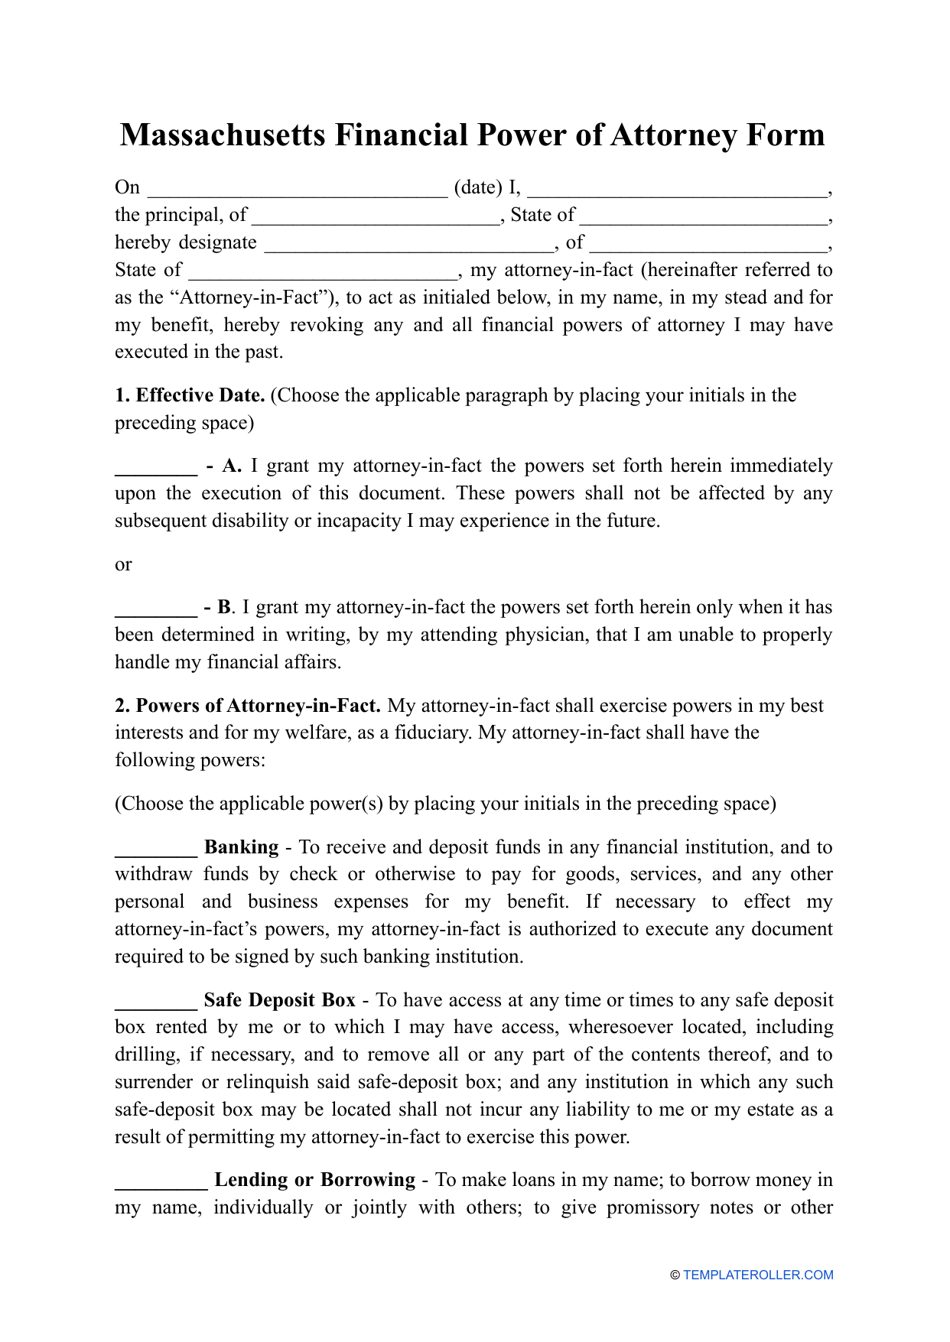 Financial Power of Attorney Form - Massachusetts, Page 1